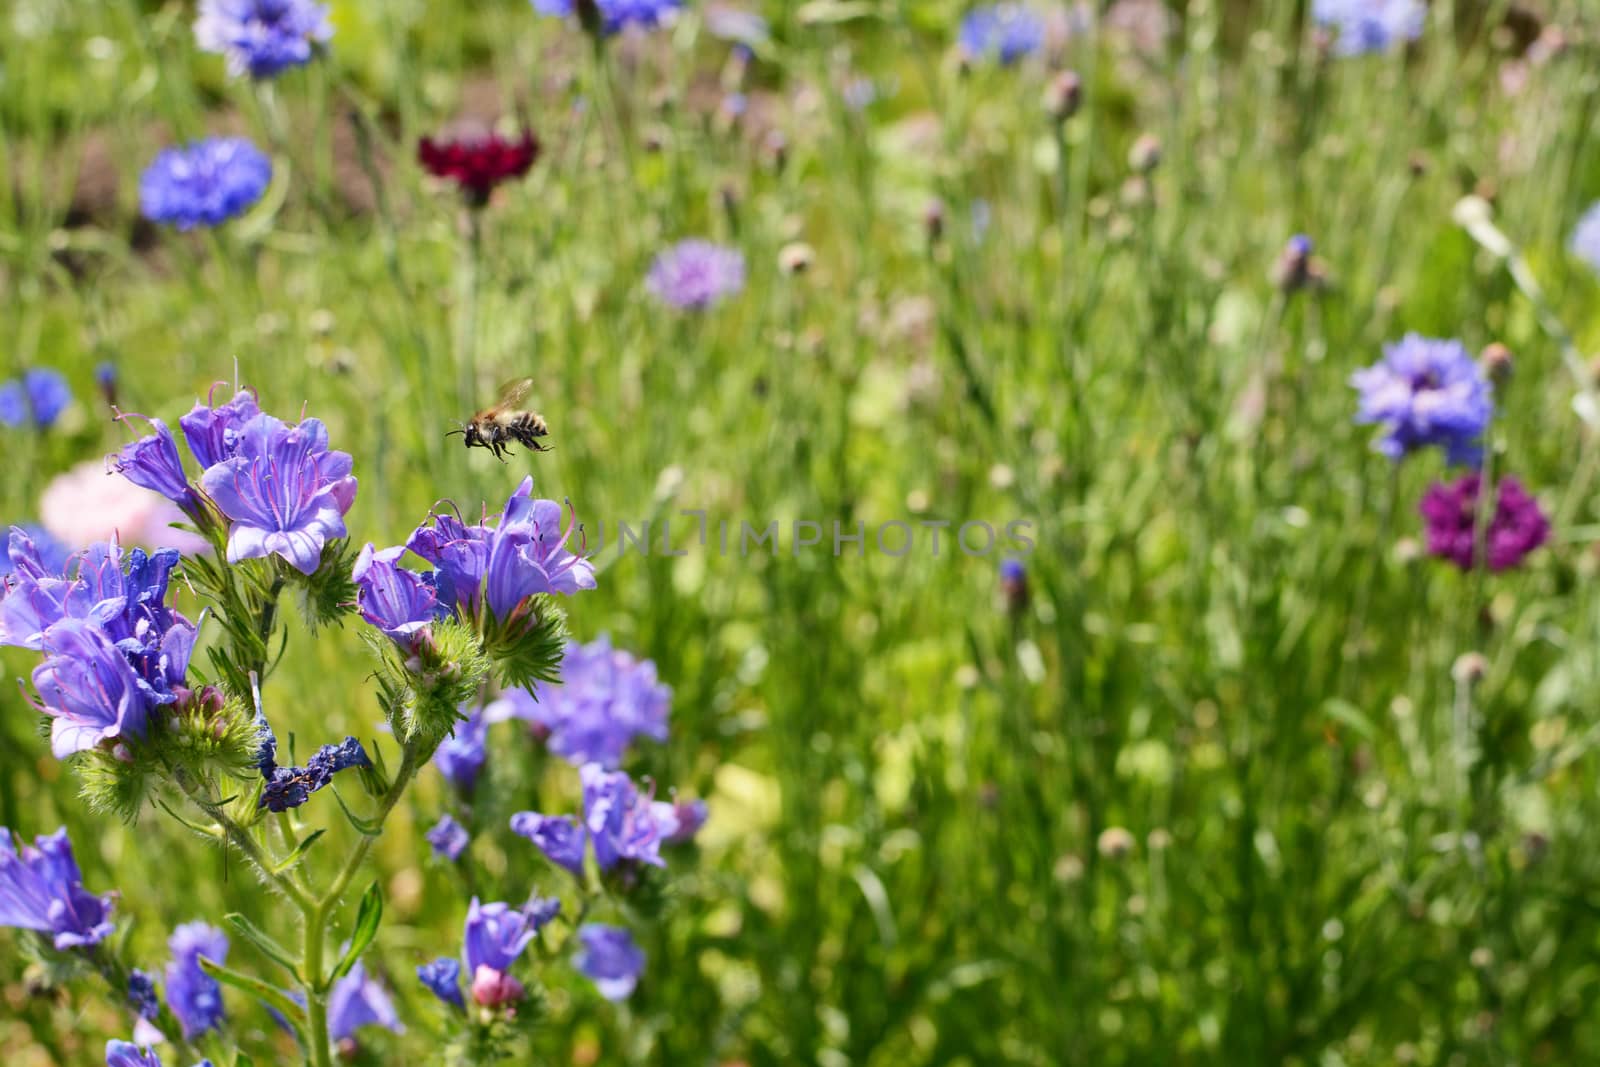 Shrill carder bee flying above viper's bugloss flowers - copy space on cornflowers in the background